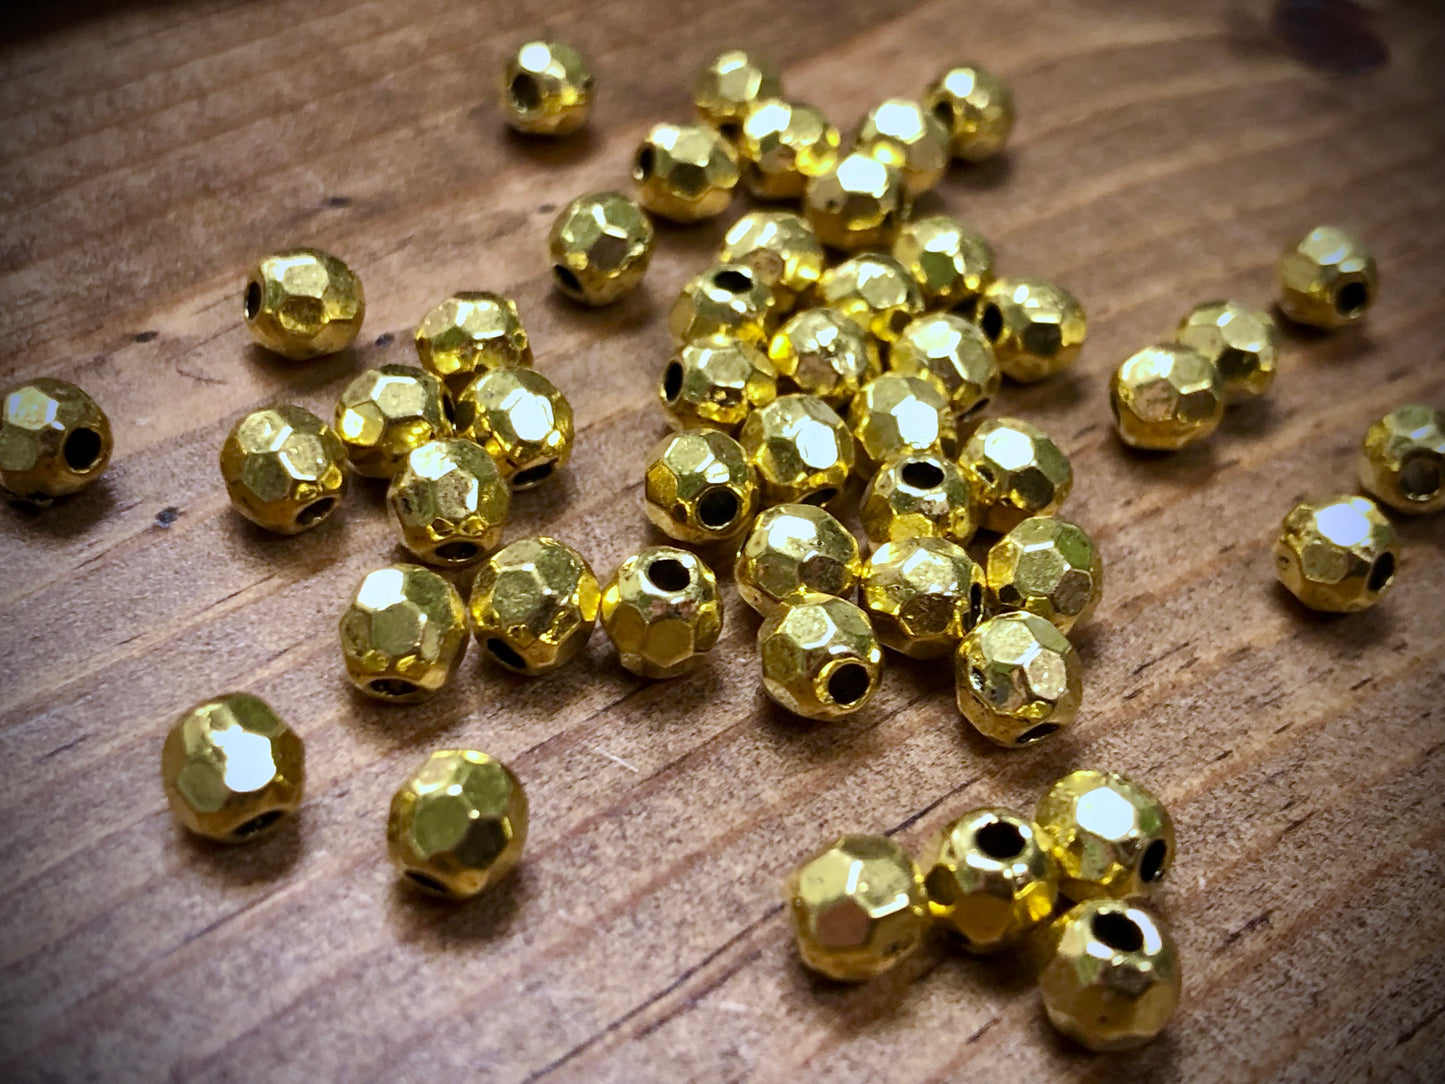 Gold Tone Pewter Spacers Set - 5mm Faceted Rounds